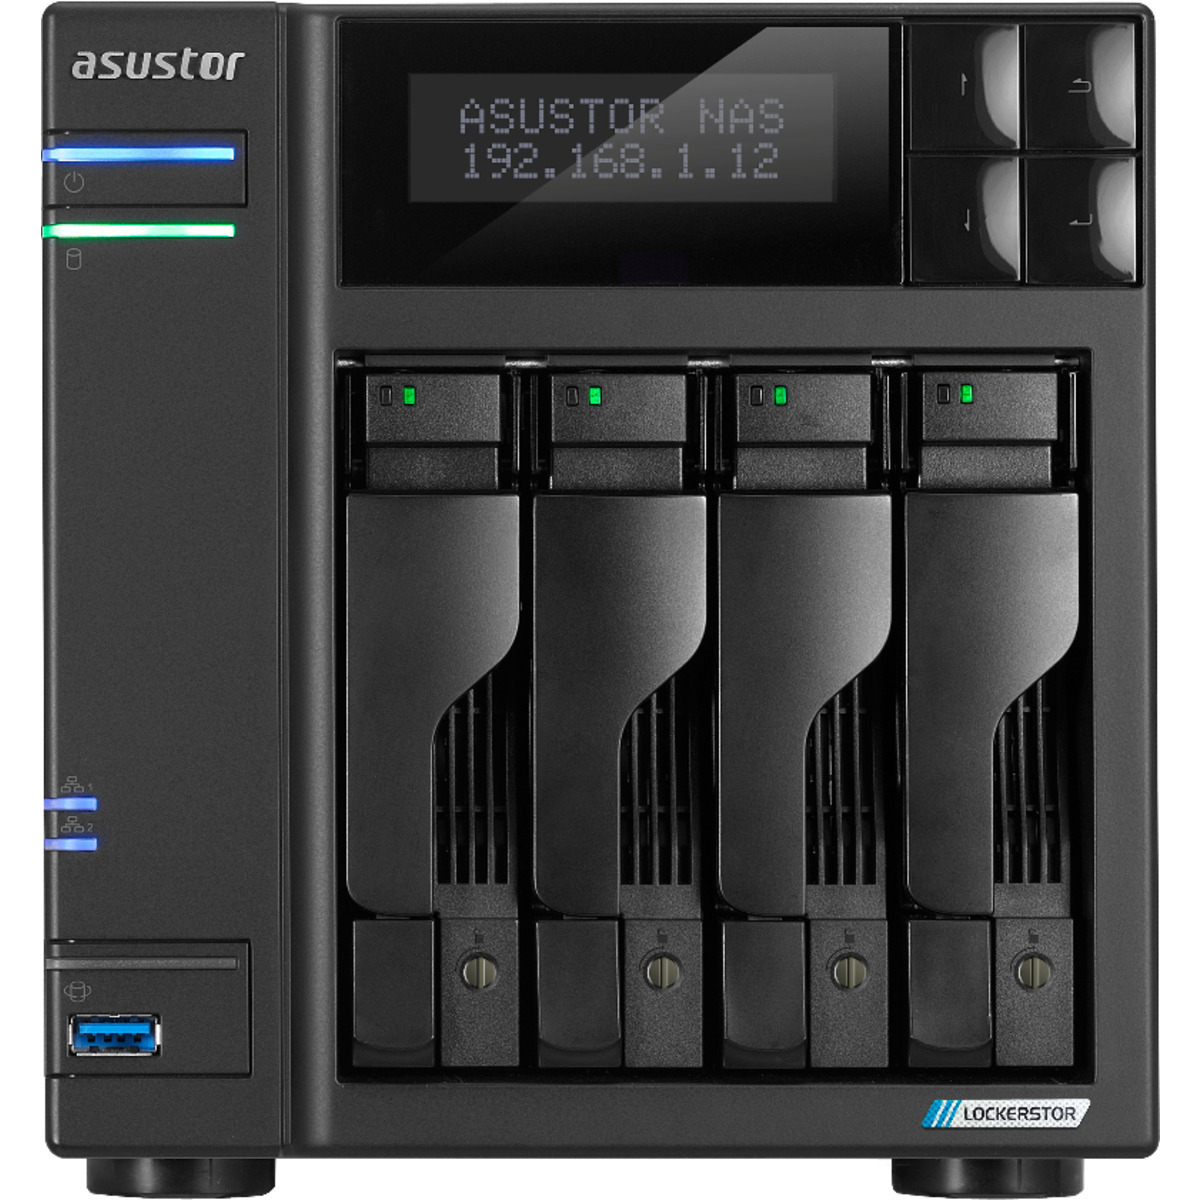 ASUSTOR LOCKERSTOR 4 Gen2 AS6704T 24tb 4-Bay Desktop Multimedia / Power User / Business NAS - Network Attached Storage Device 4x6tb Seagate IronWolf ST6000VN006 3.5 5400rpm SATA 6Gb/s HDD NAS Class Drives Installed - Burn-In Tested - FREE RAM UPGRADE LOCKERSTOR 4 Gen2 AS6704T